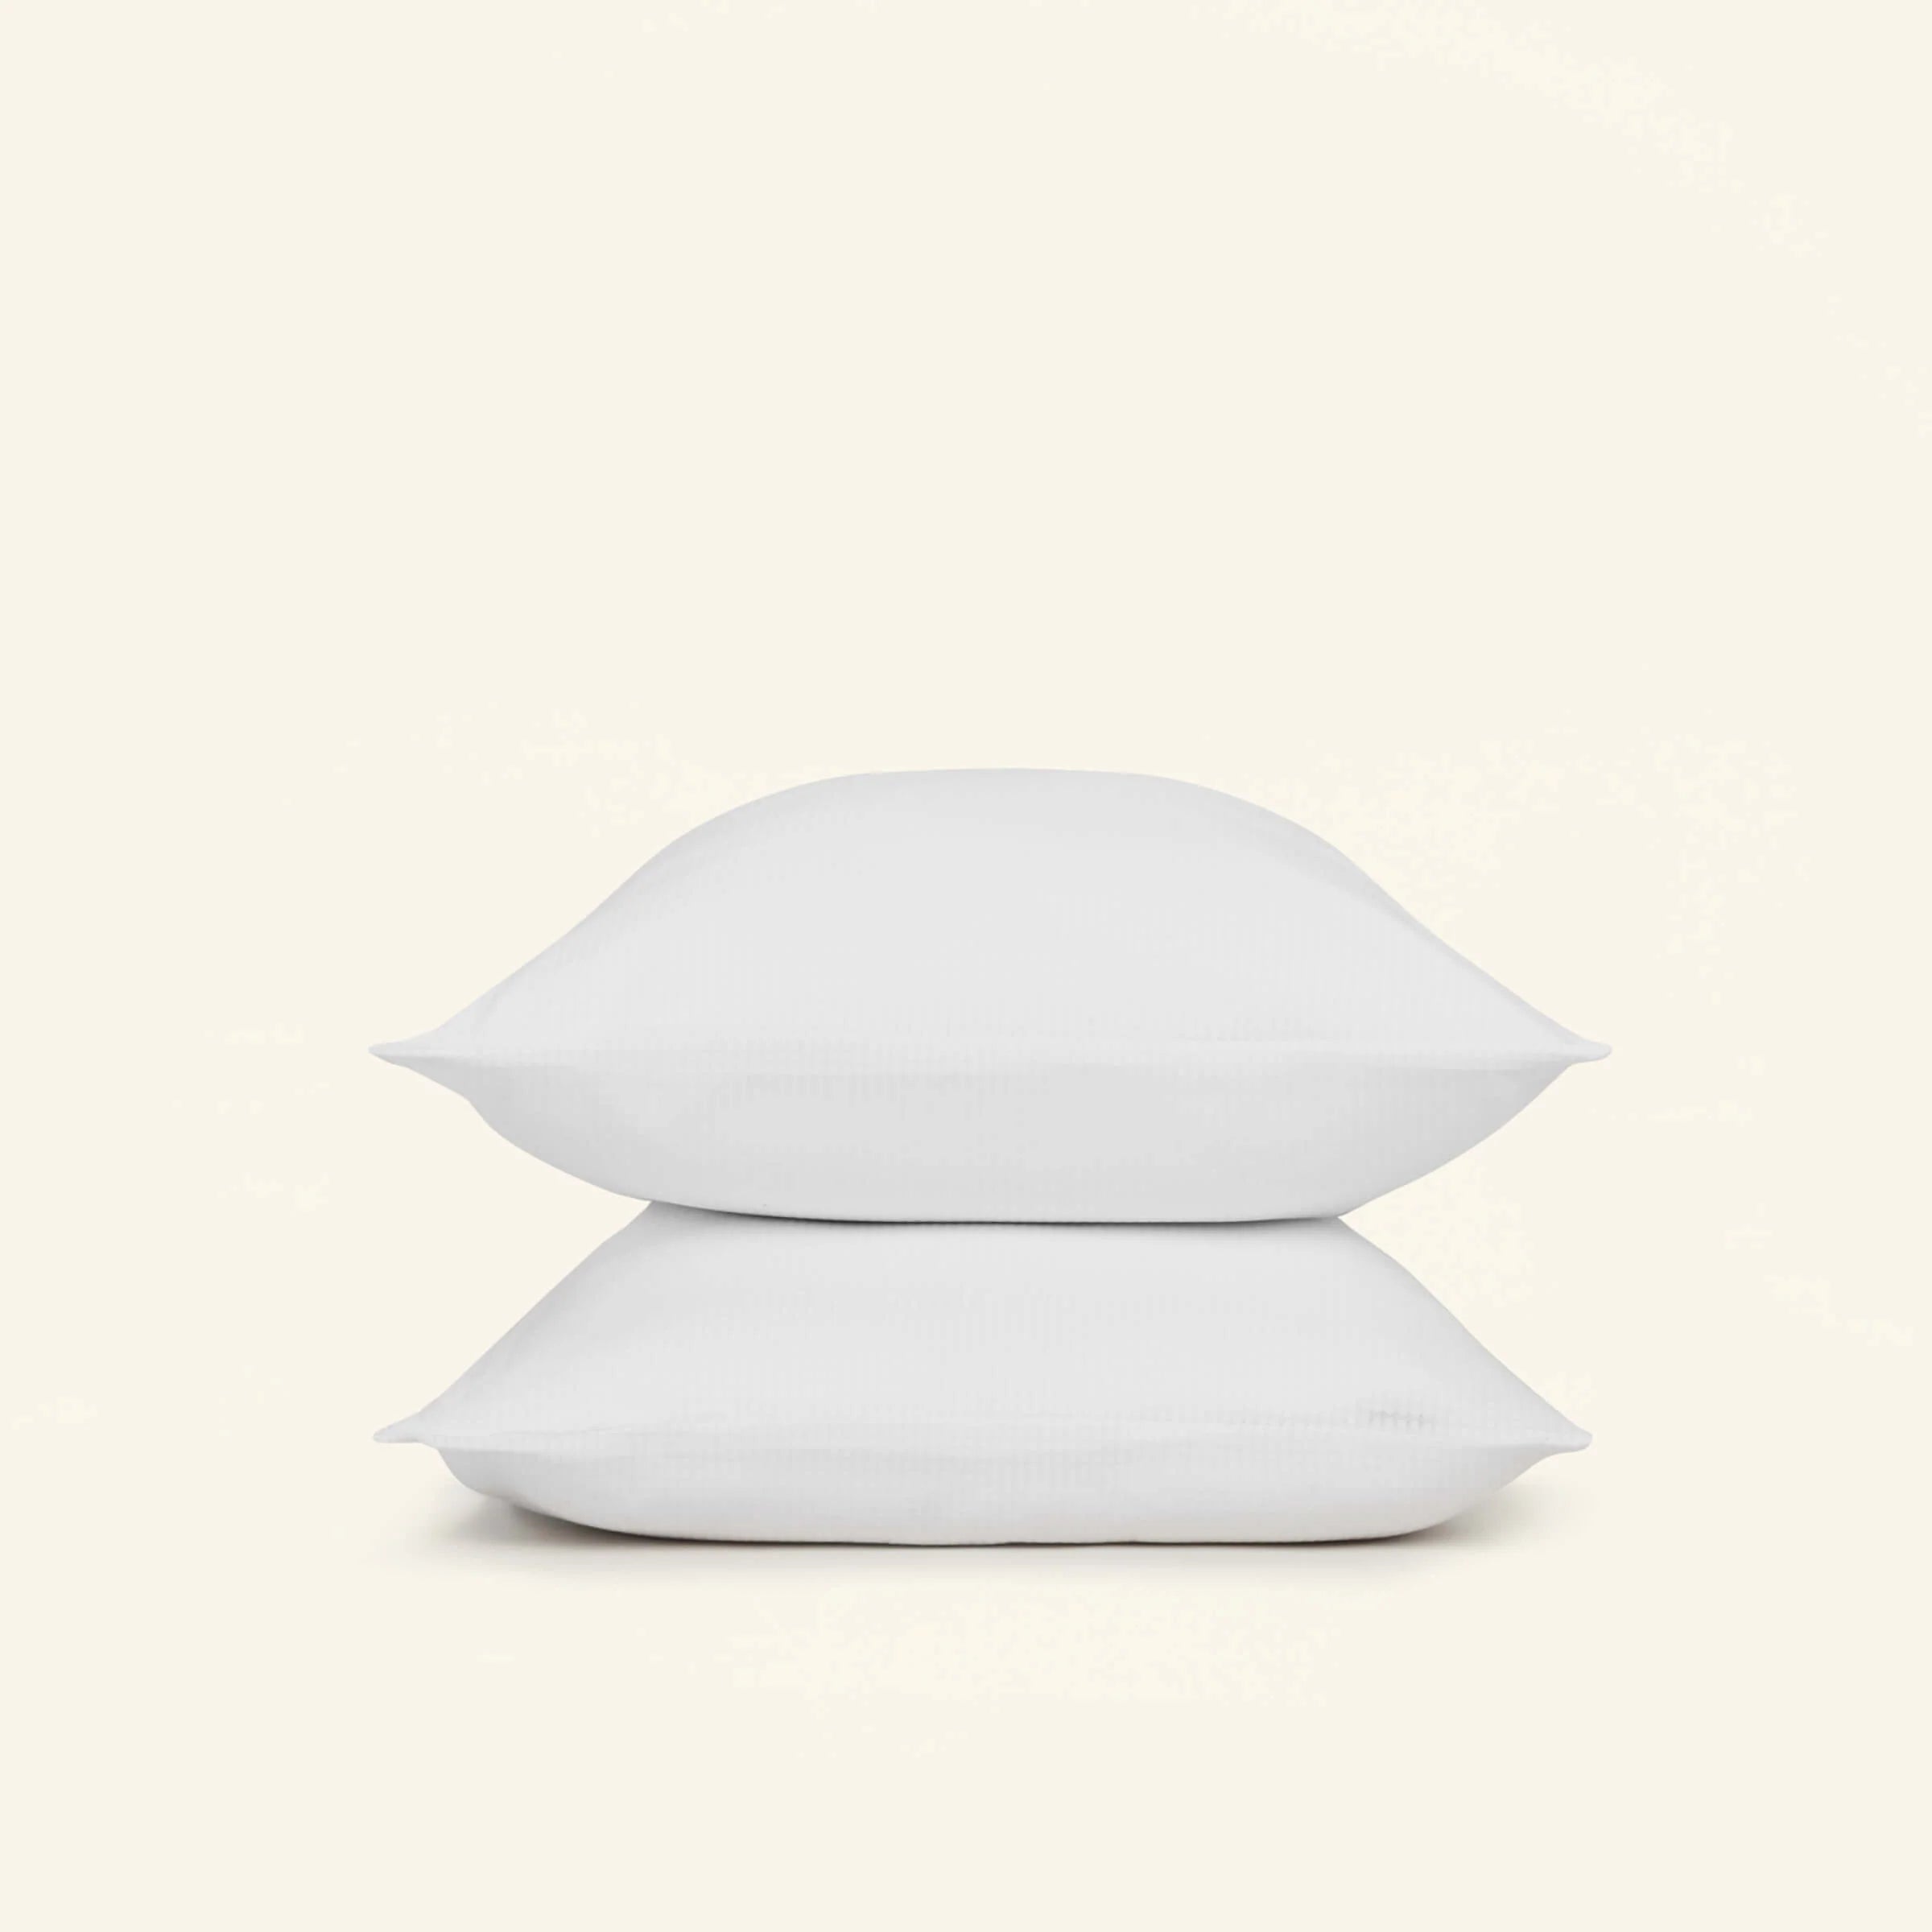 COOLING PILLOW - pillow that truly keeps you cool.